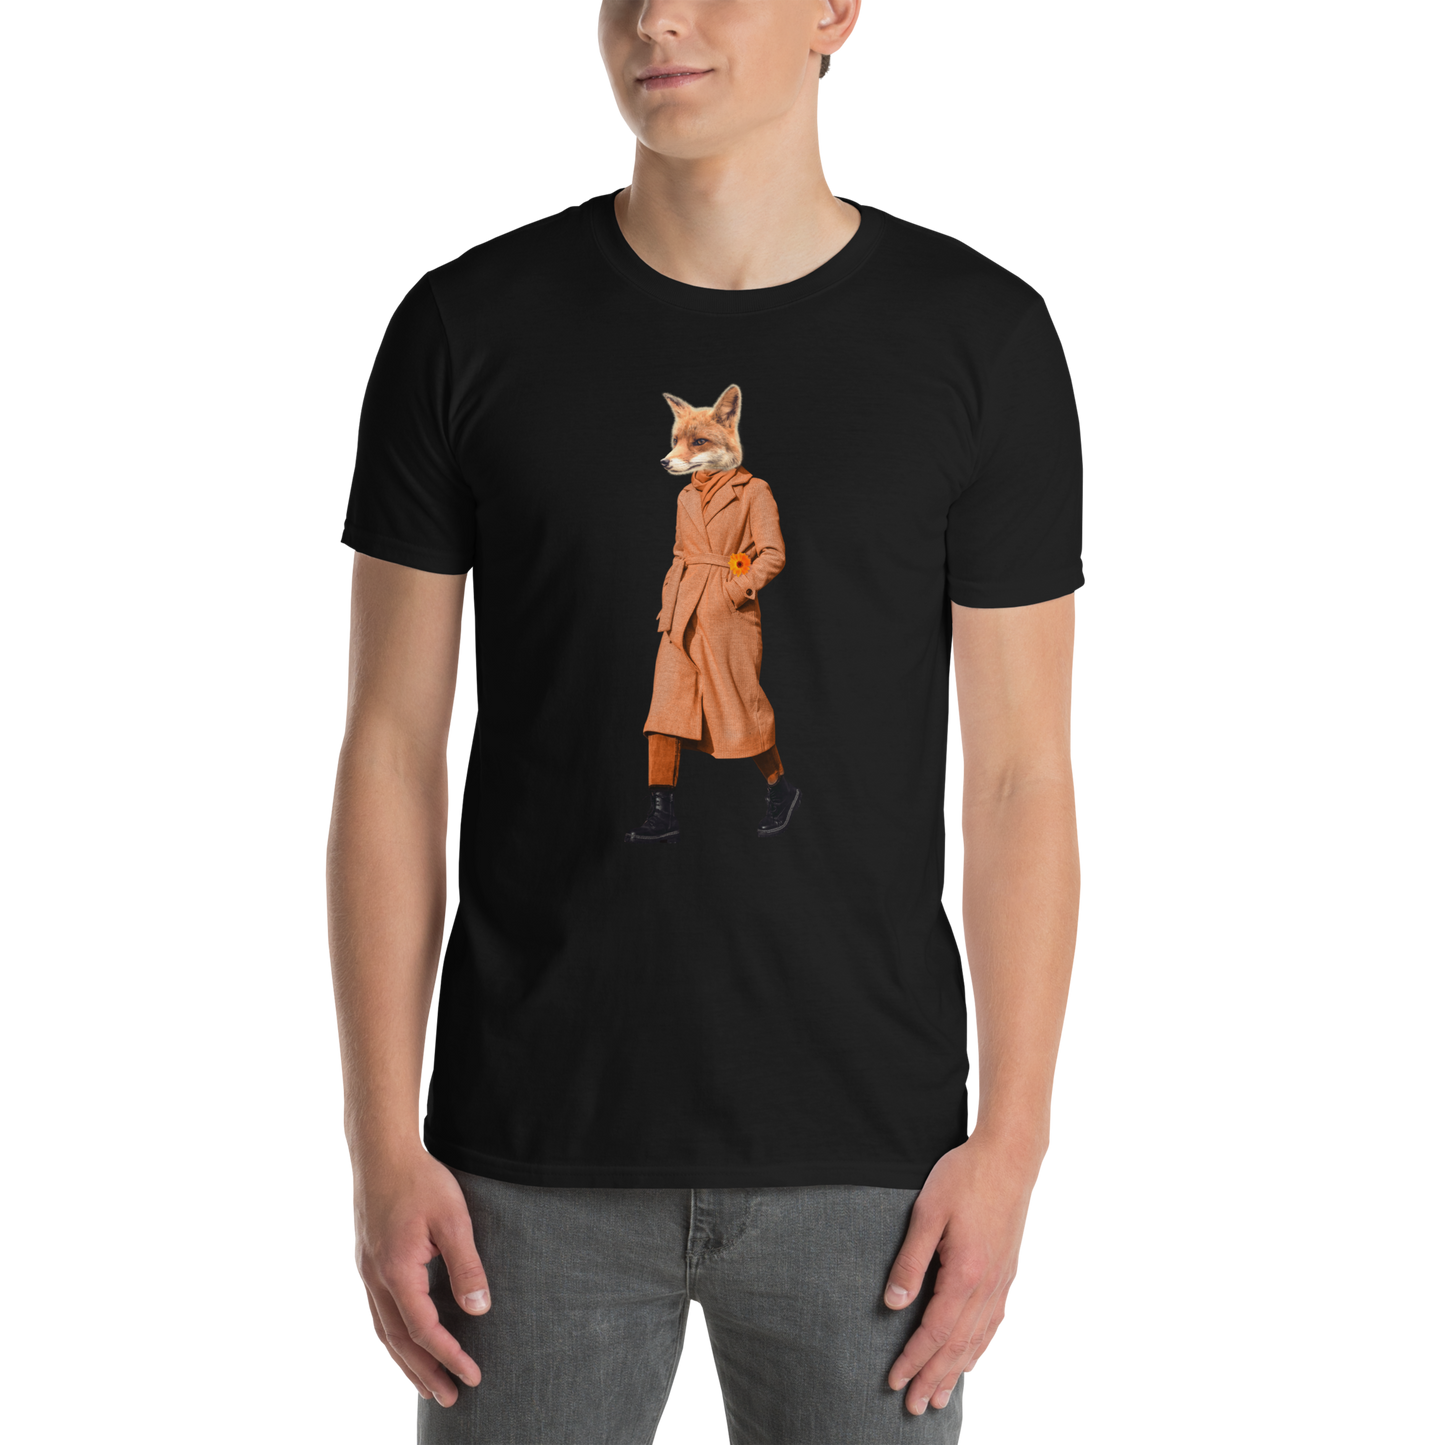 Man wearing a Black Anthropomorphic Fox T-Shirt featuring a sly Anthropomorphic Fox In a Trench Coat graphic on the chest - Funny Graphic Fox T-Shirts - Boozy Fox